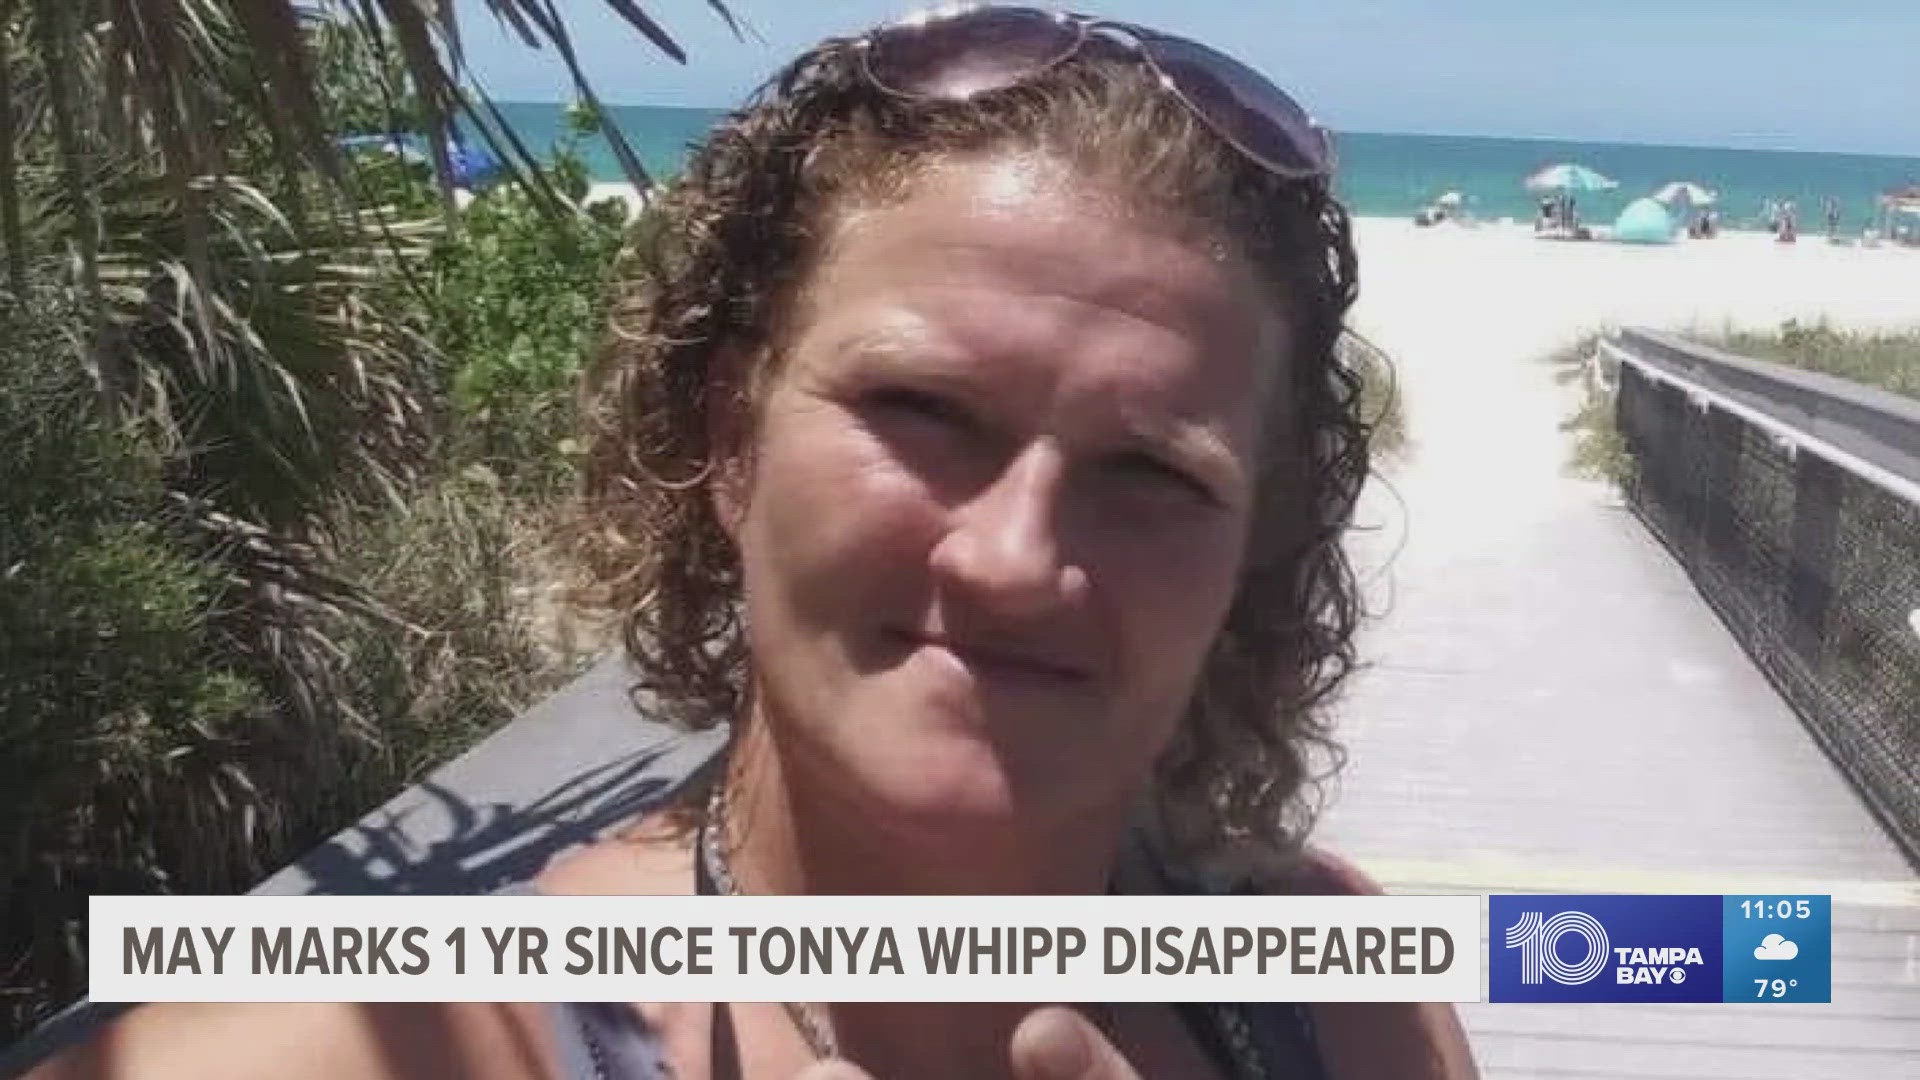 Tonya's family believes she was killed, and that the killer is still walking among them.